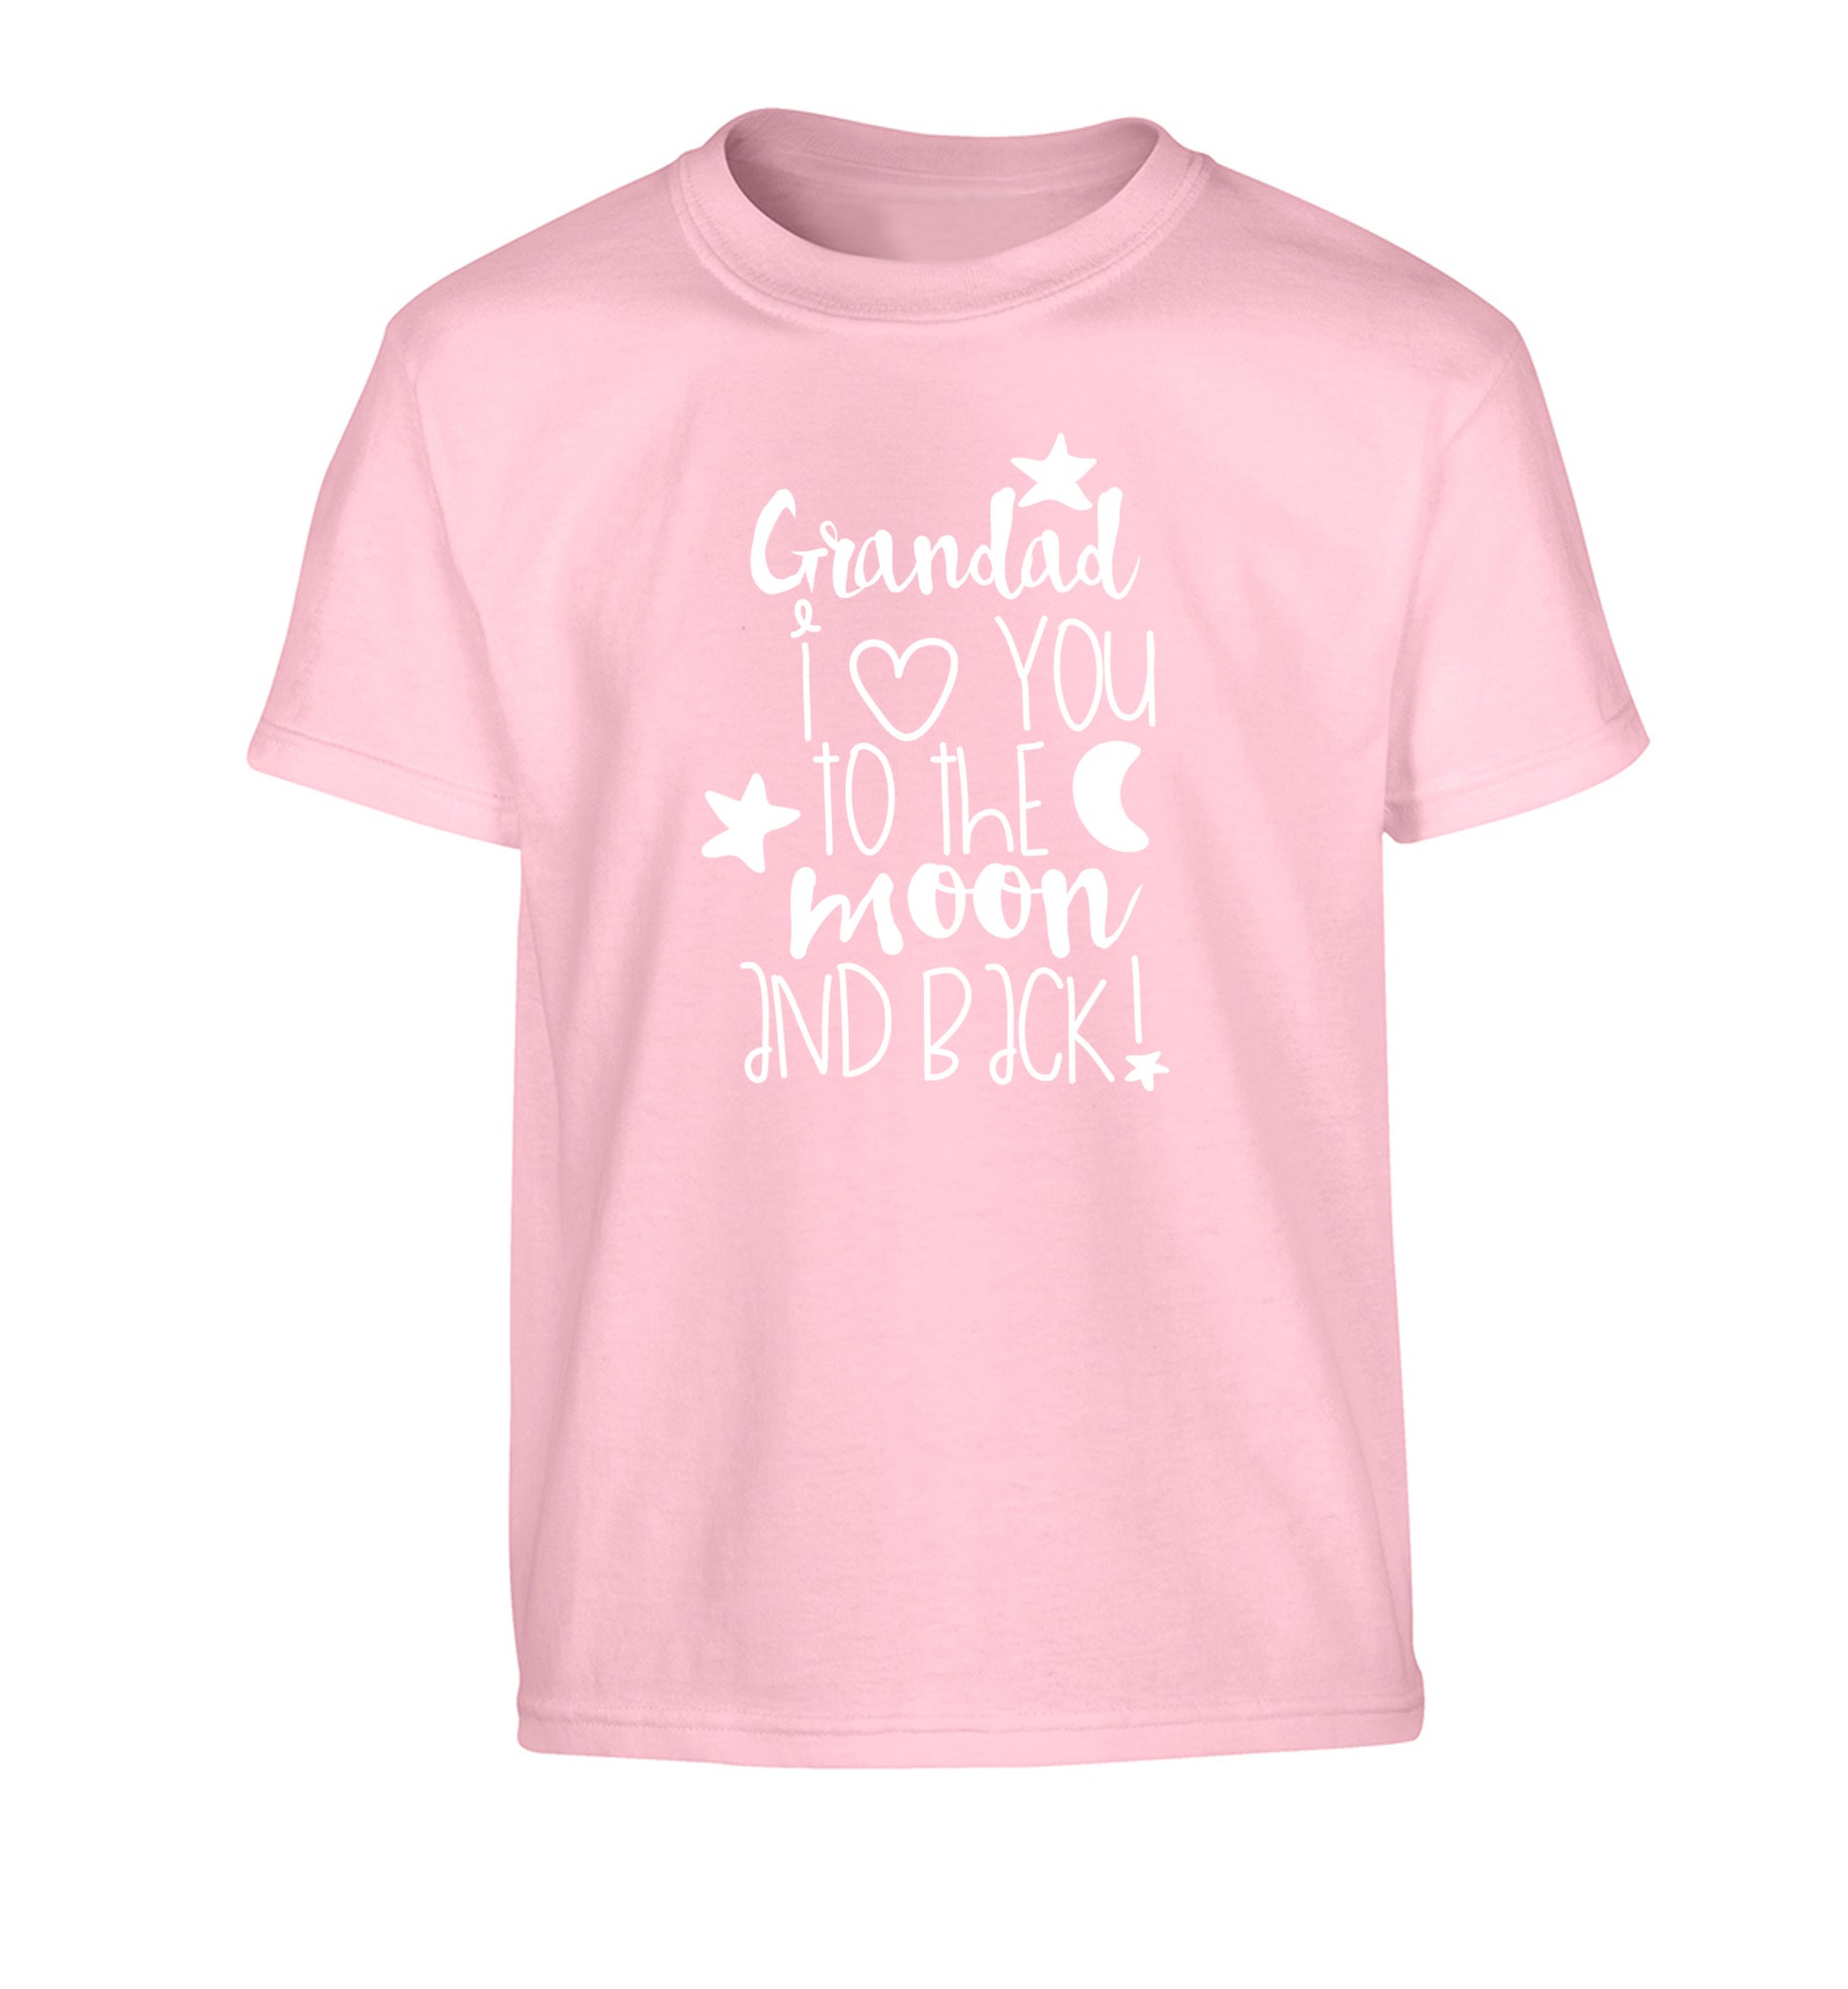 Grandad's I love you to the moon and back Children's light pink Tshirt 12-14 Years